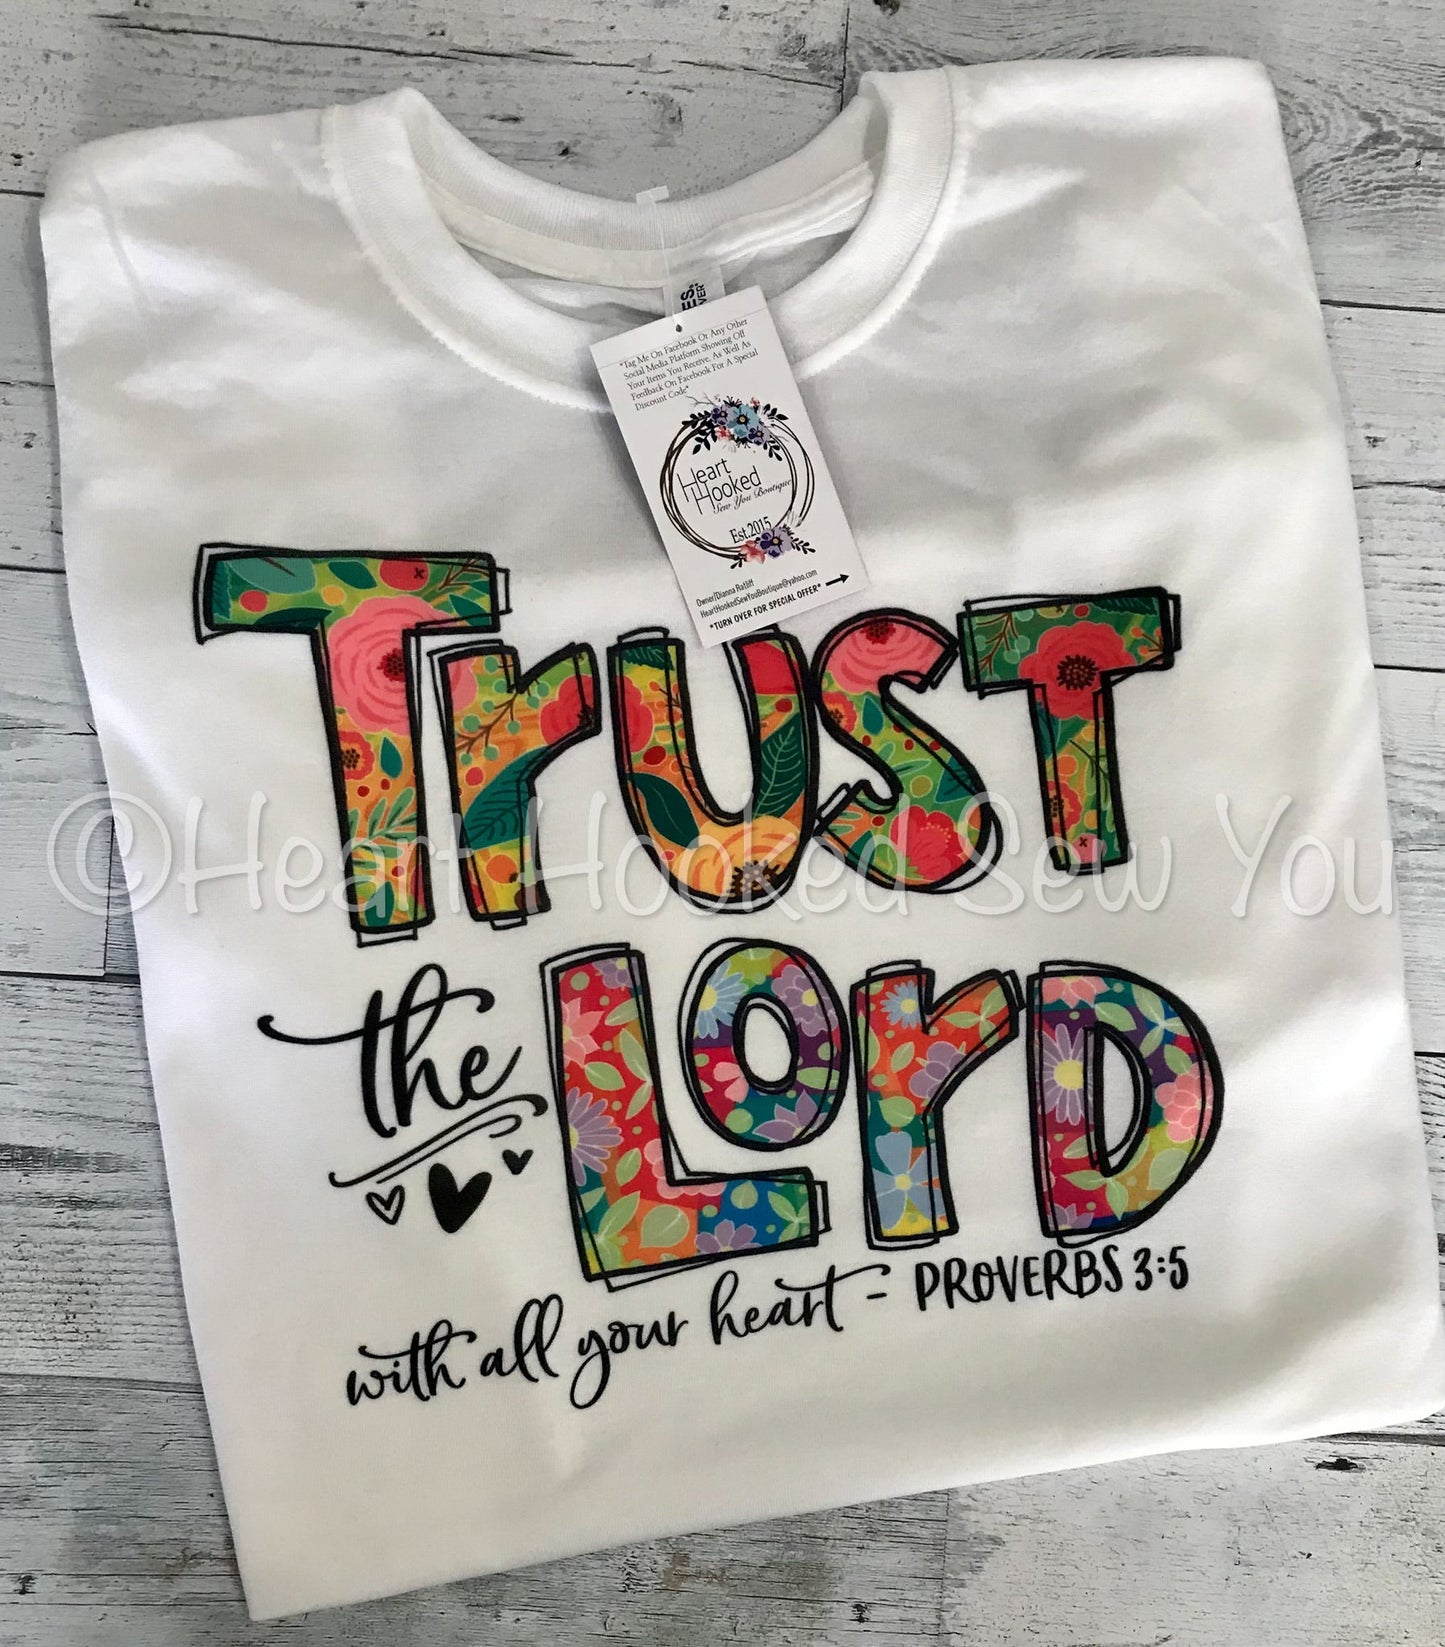 Tust The Lord *Proverbs 3:5